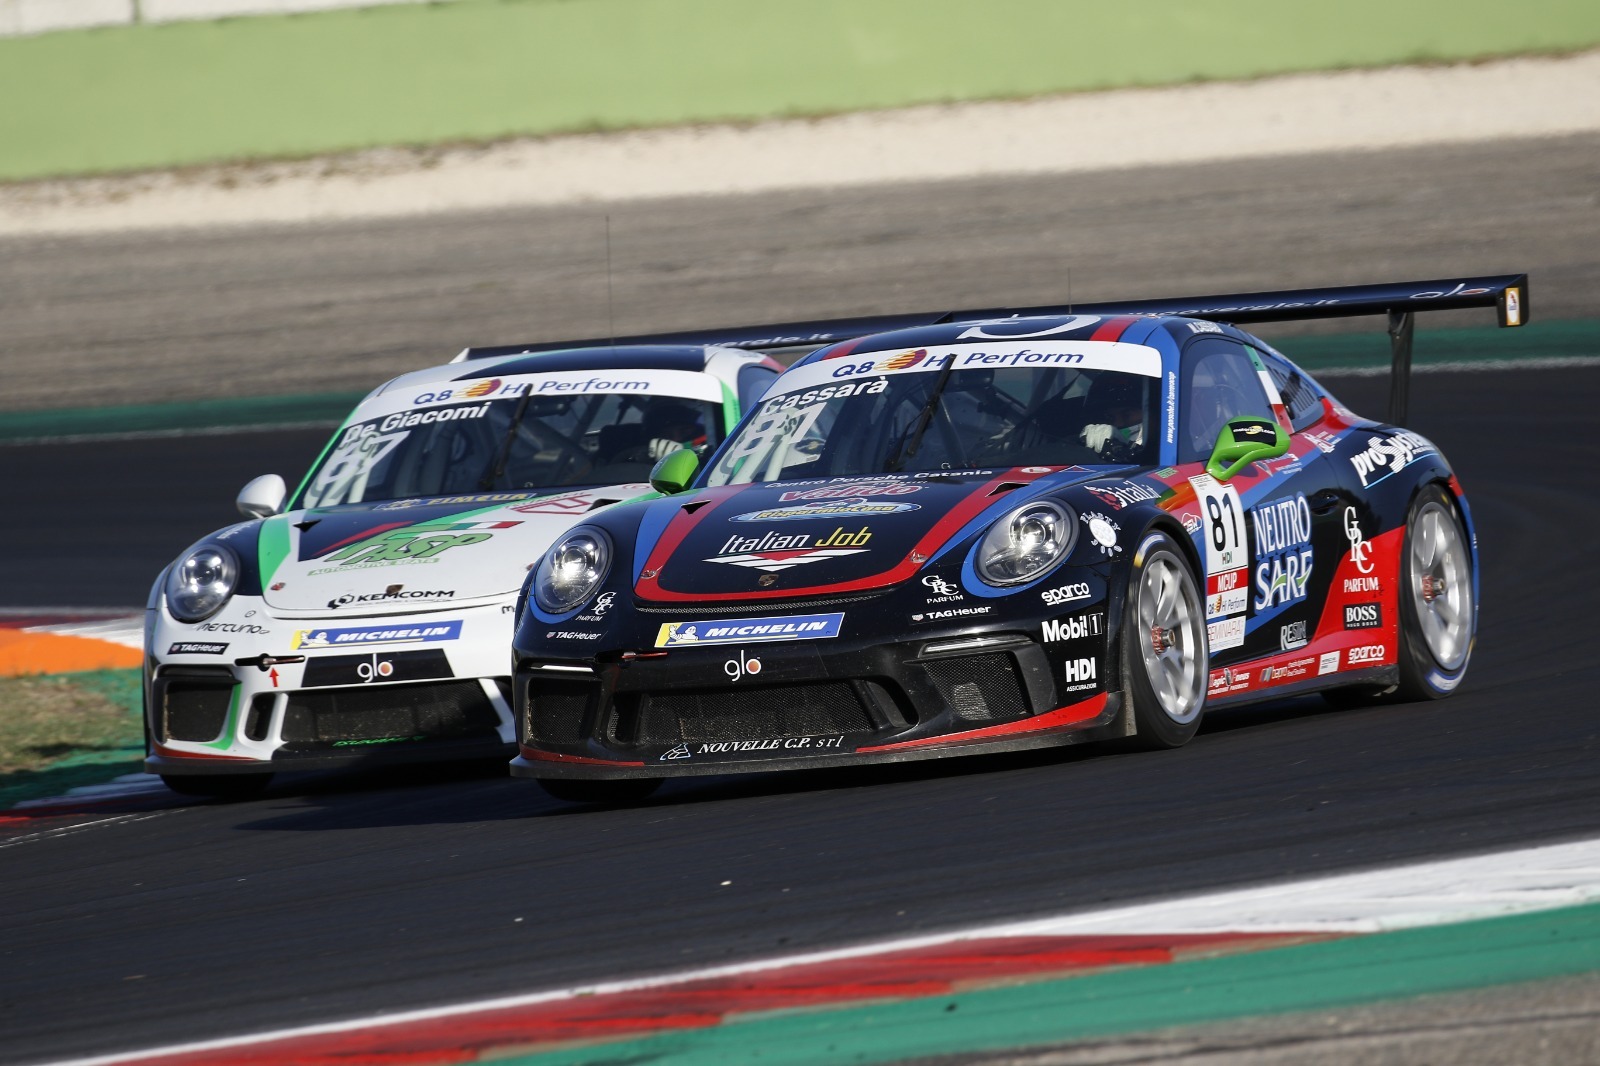 Raptor Engineering vince ancora a Vallelunga in Carrera Cup